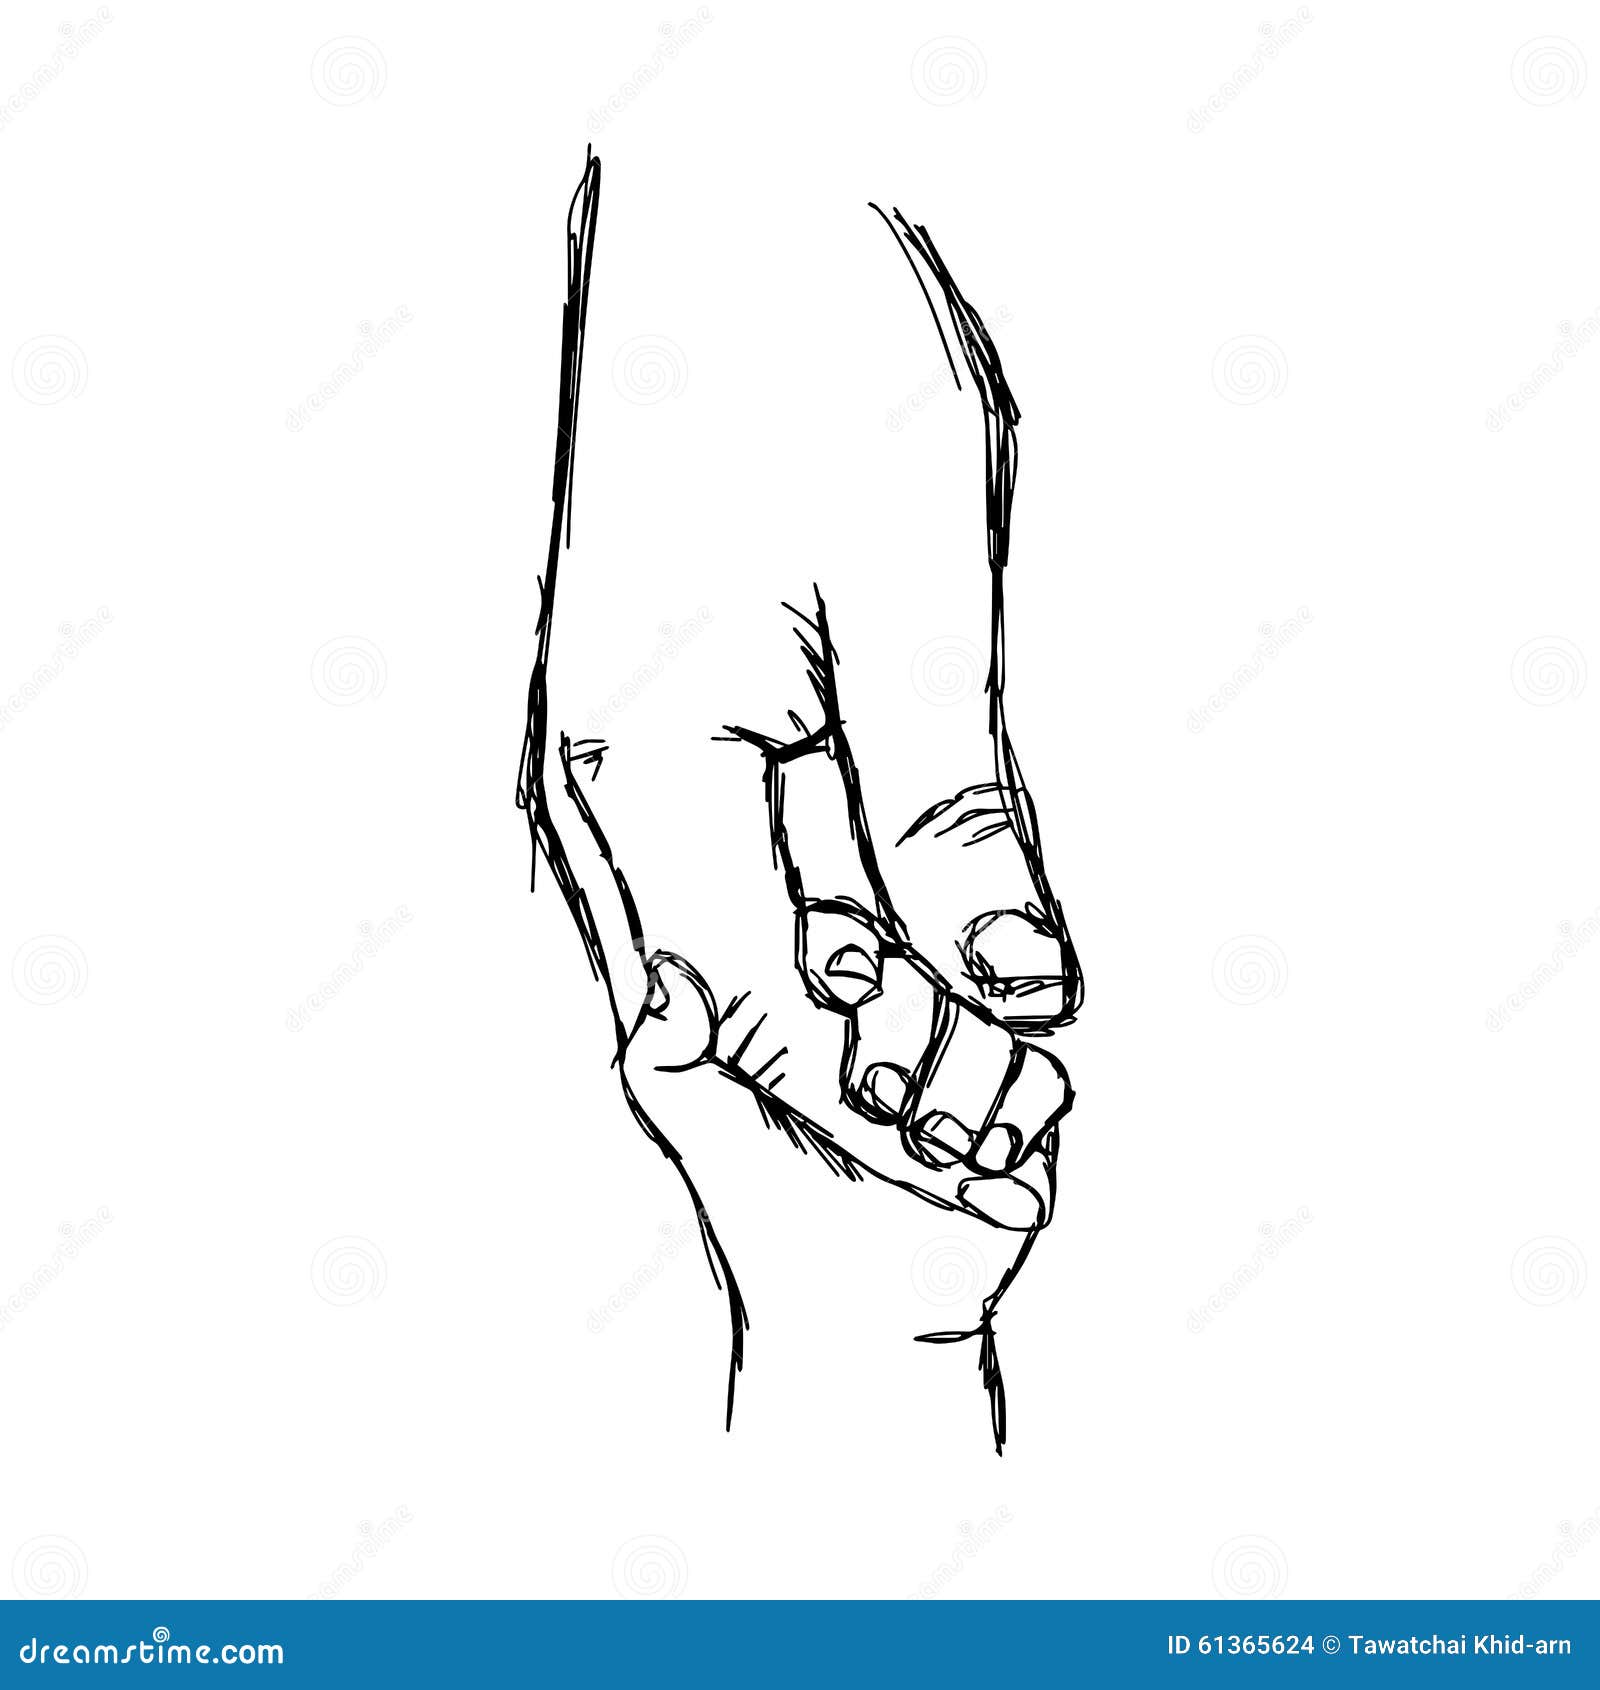   doodle hand drawn sketch of parent holds the